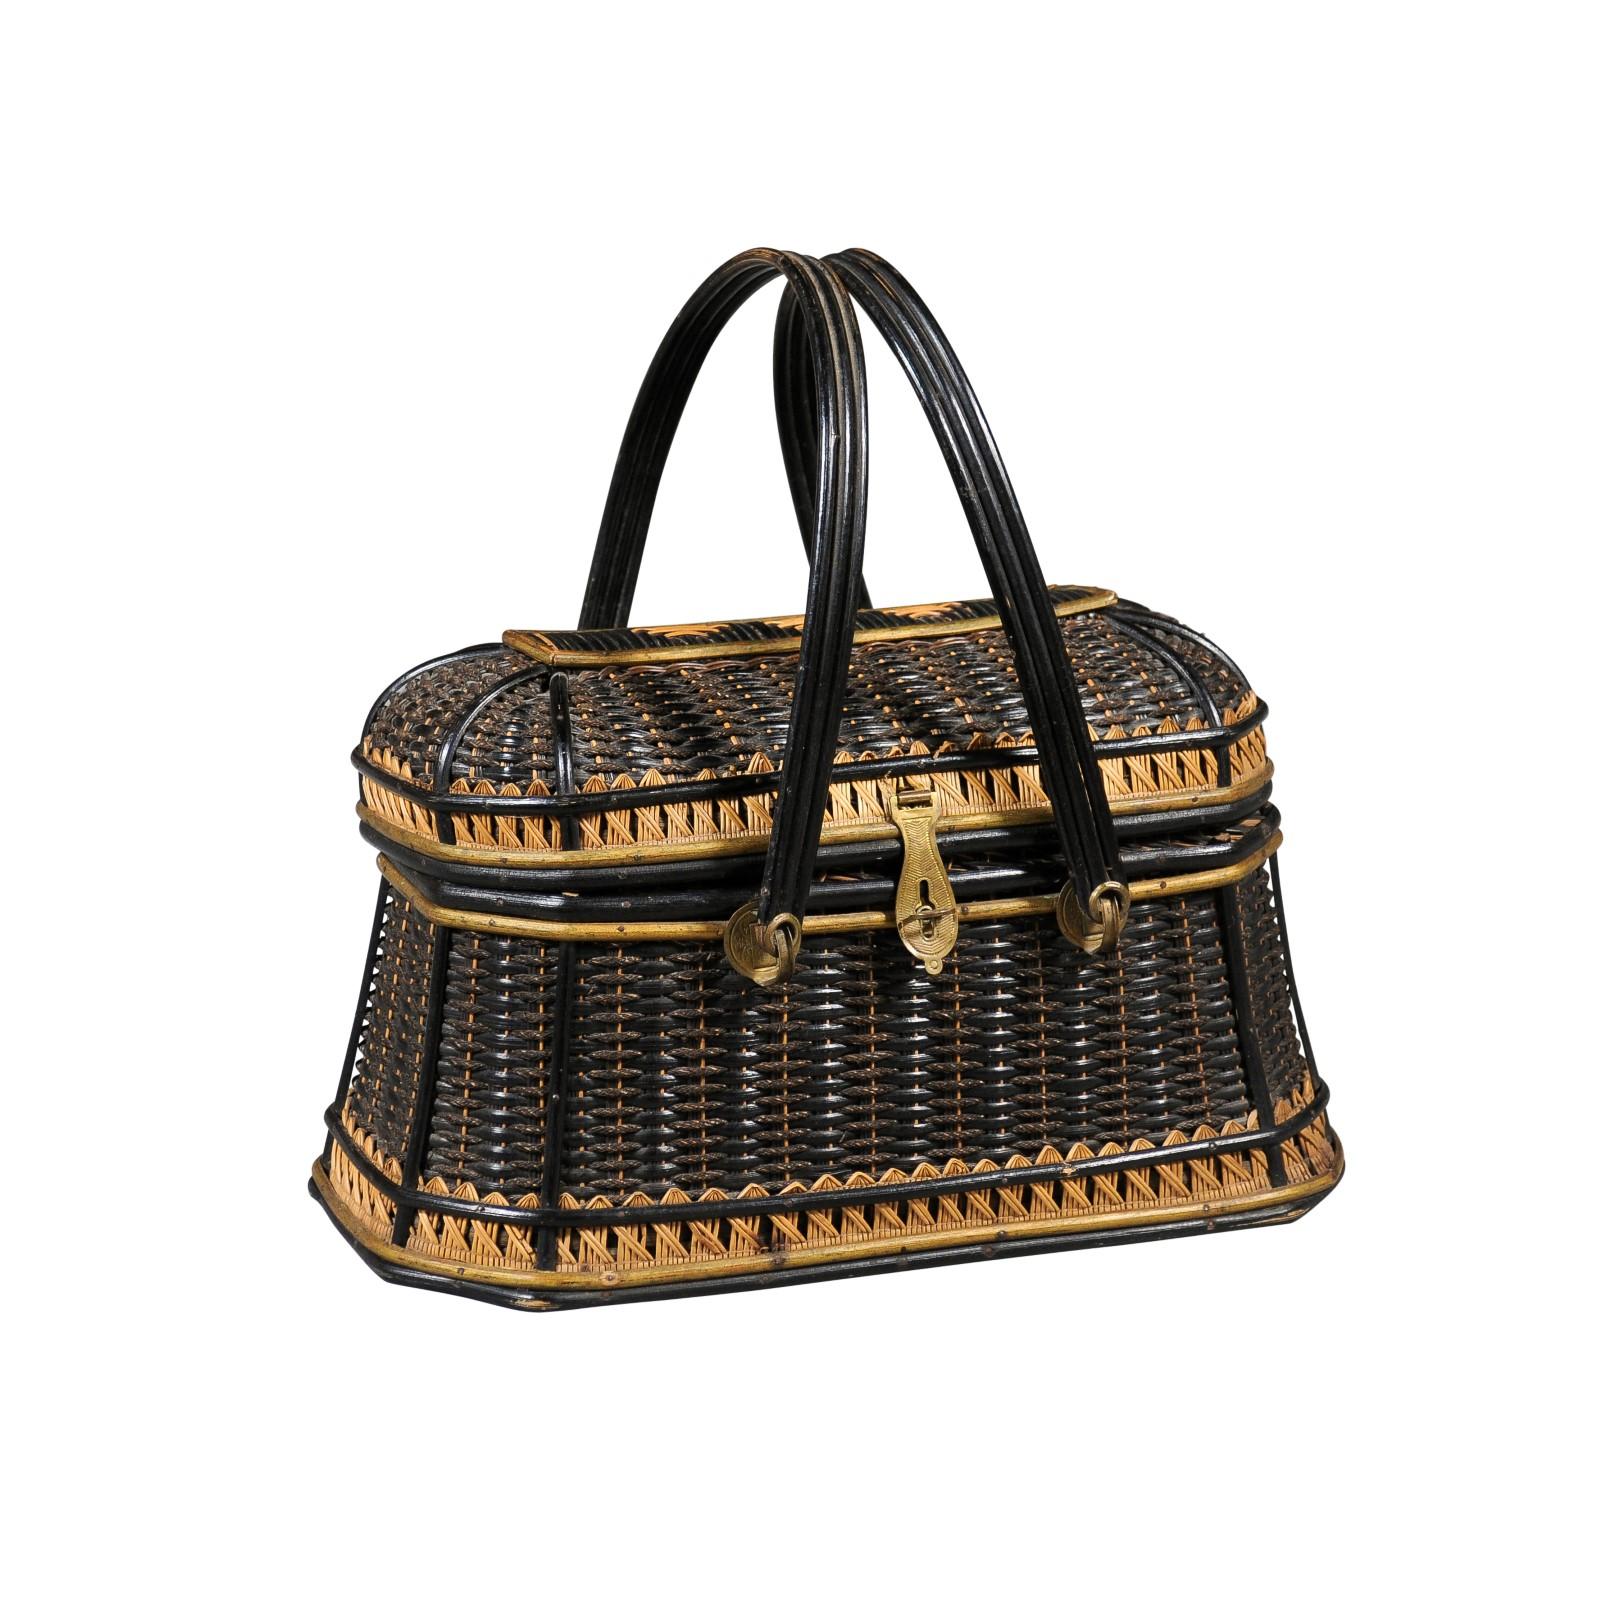 Rustic Swedish 1890s Two-Toned Wicker Tapering Basket with Large Handles For Sale 4